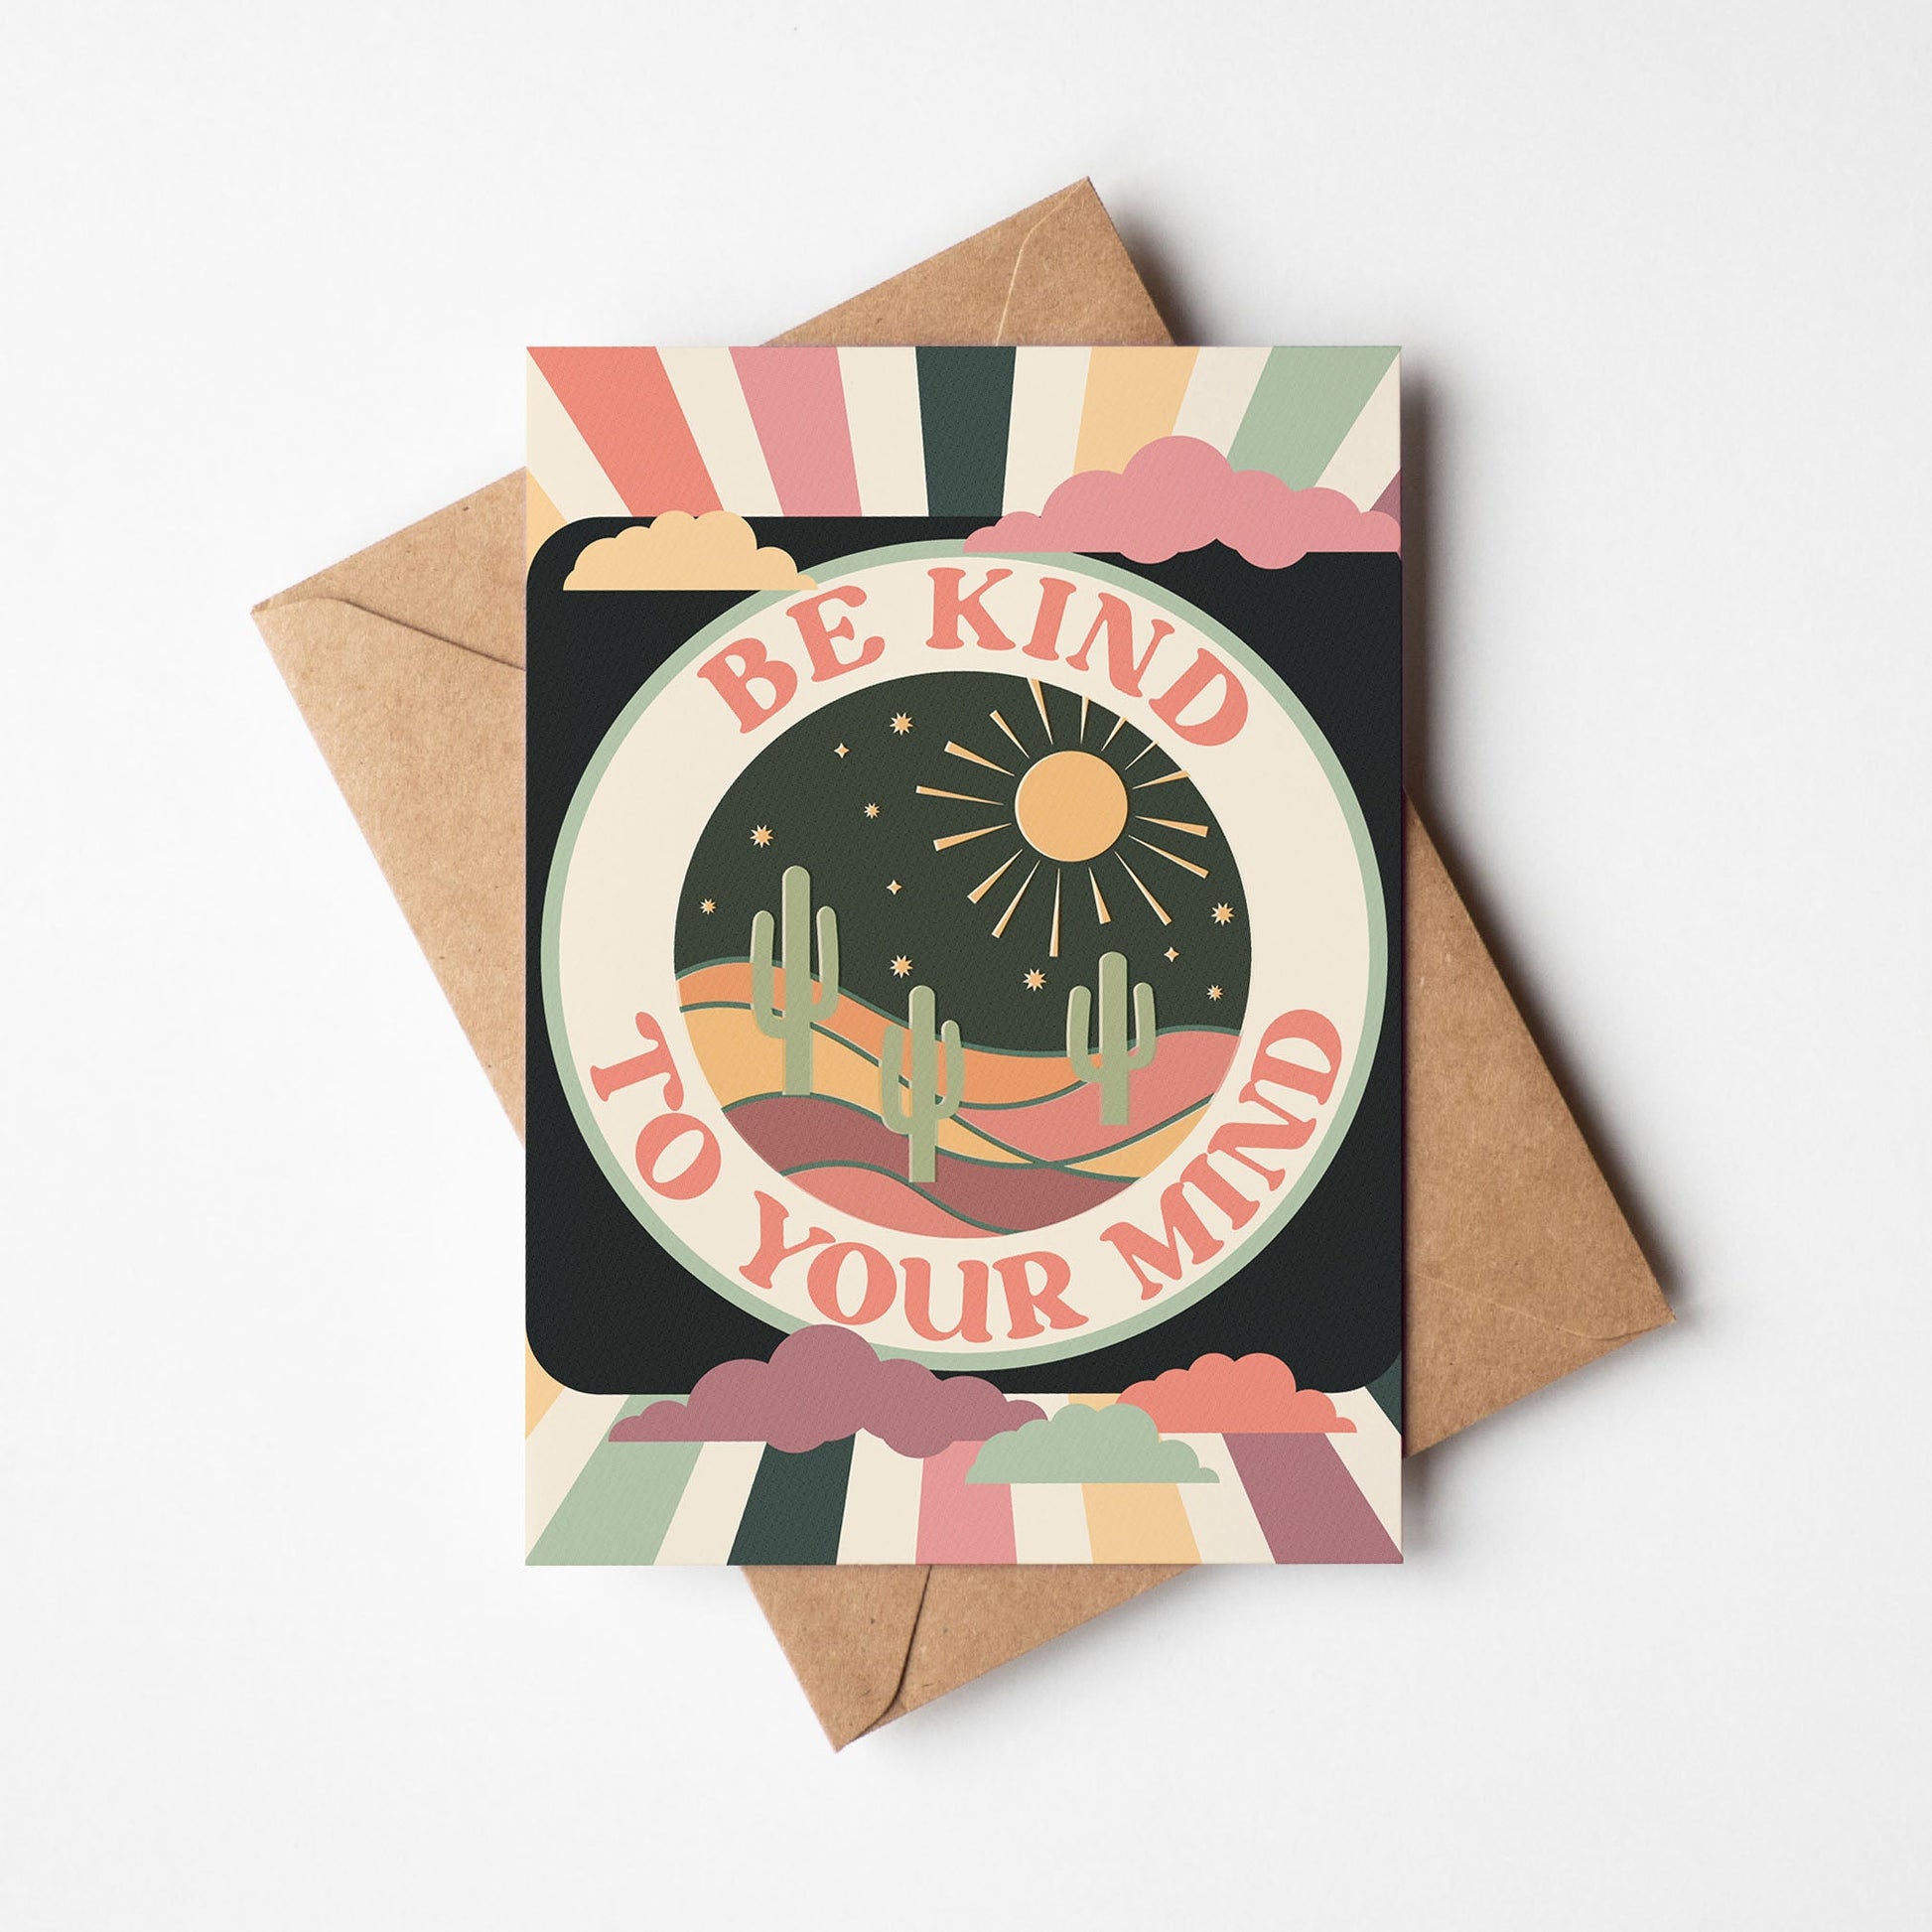 'Be Kind To Your Mind' Positivity A6 Greetings Card | Fully Recycled - OMG KITTY